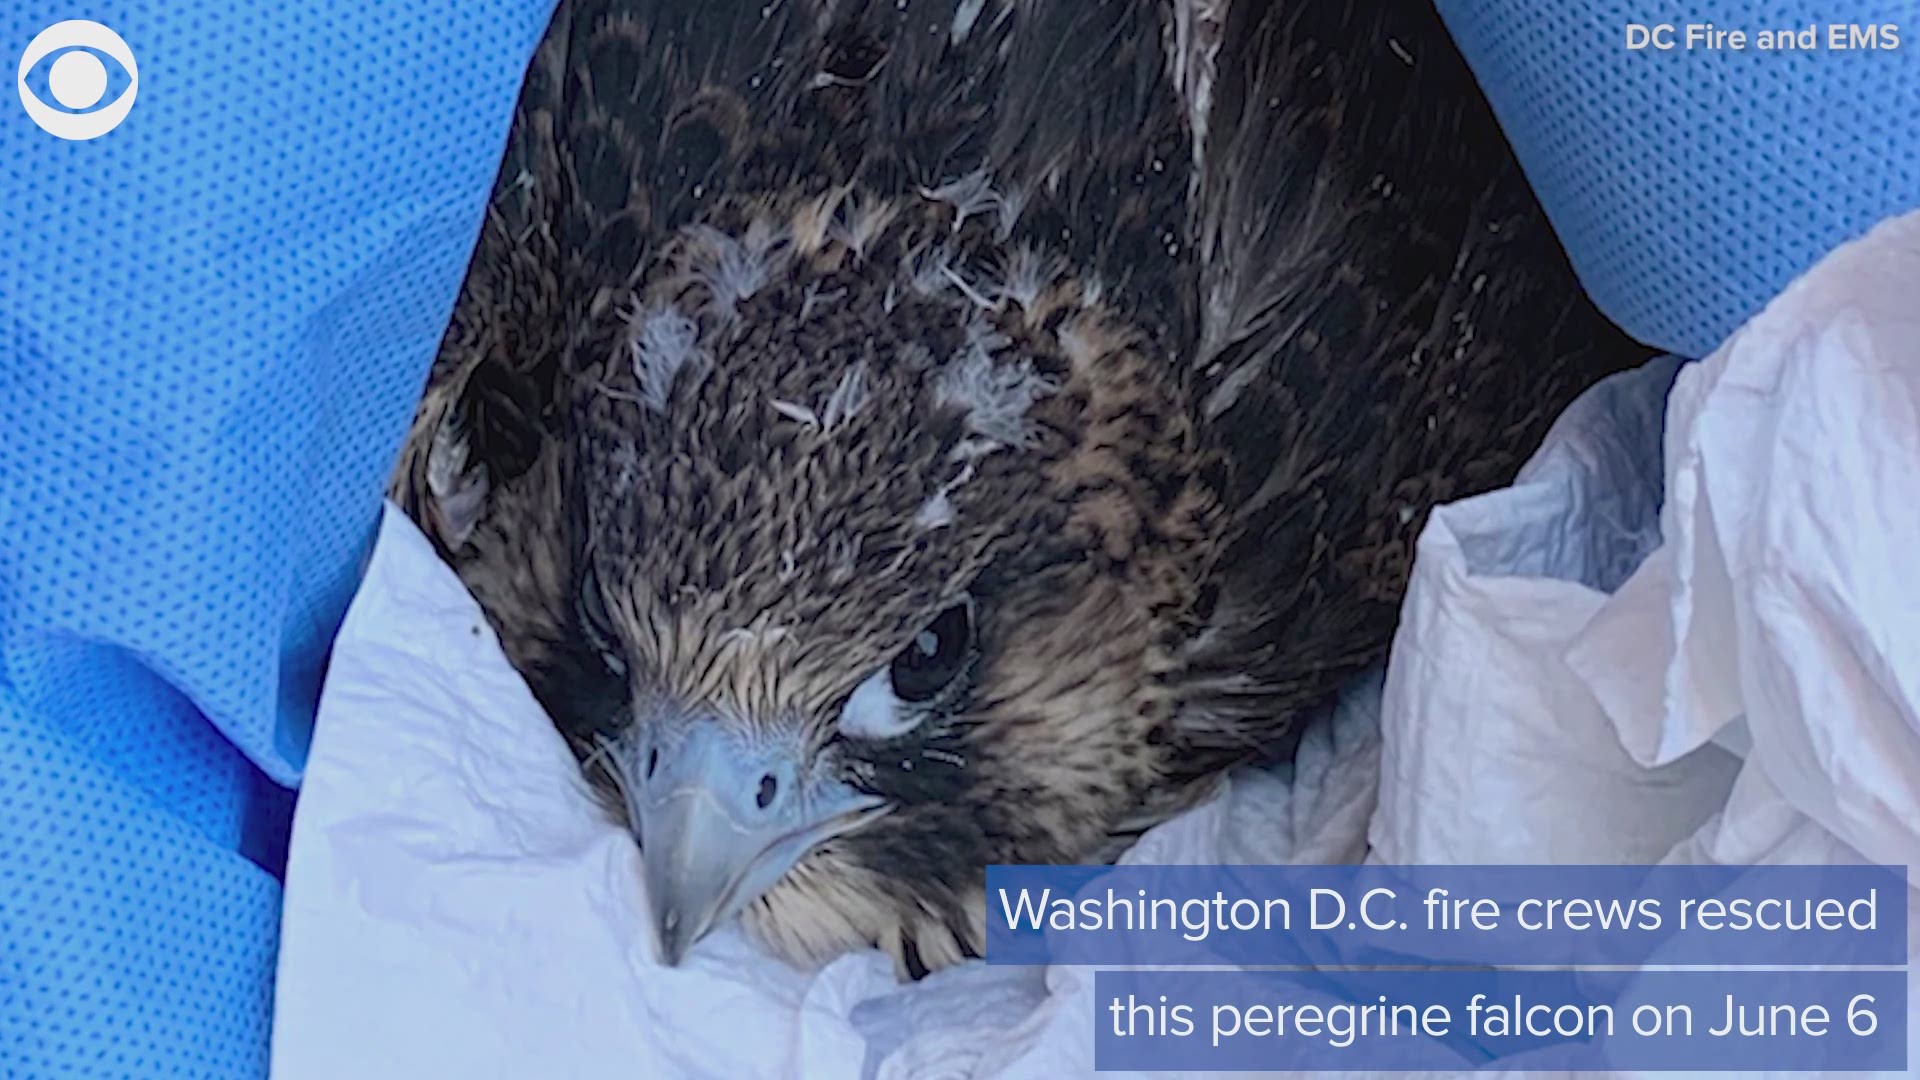 Washington D.C. fire crews were inspecting a bridge and found a falcon in the water that needed help. Take a look at the rescue.